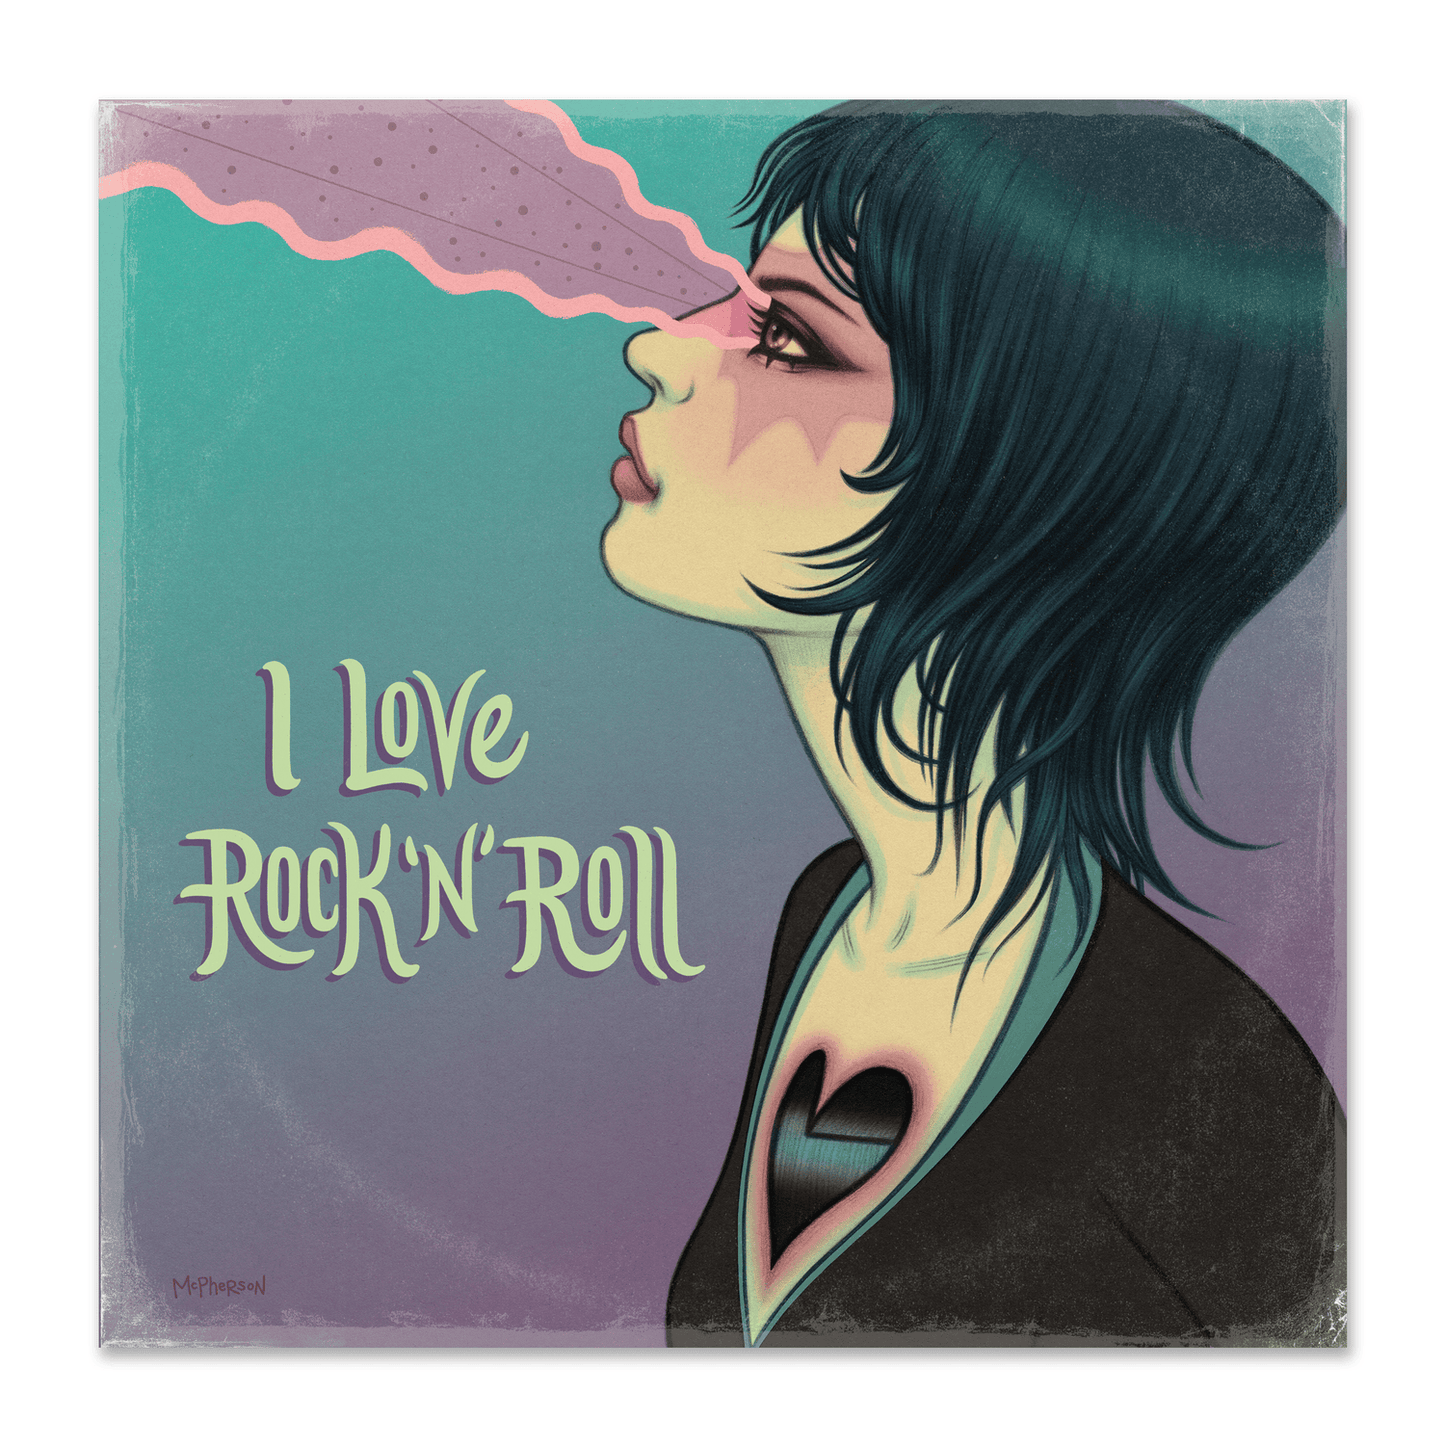 JOAN JETT AND THE BLACKHEARTS - 40 x 40: I LOVE ROCK AND ROLL / BAD REPUTATION - GRAPHIC NOVEL - BOOK